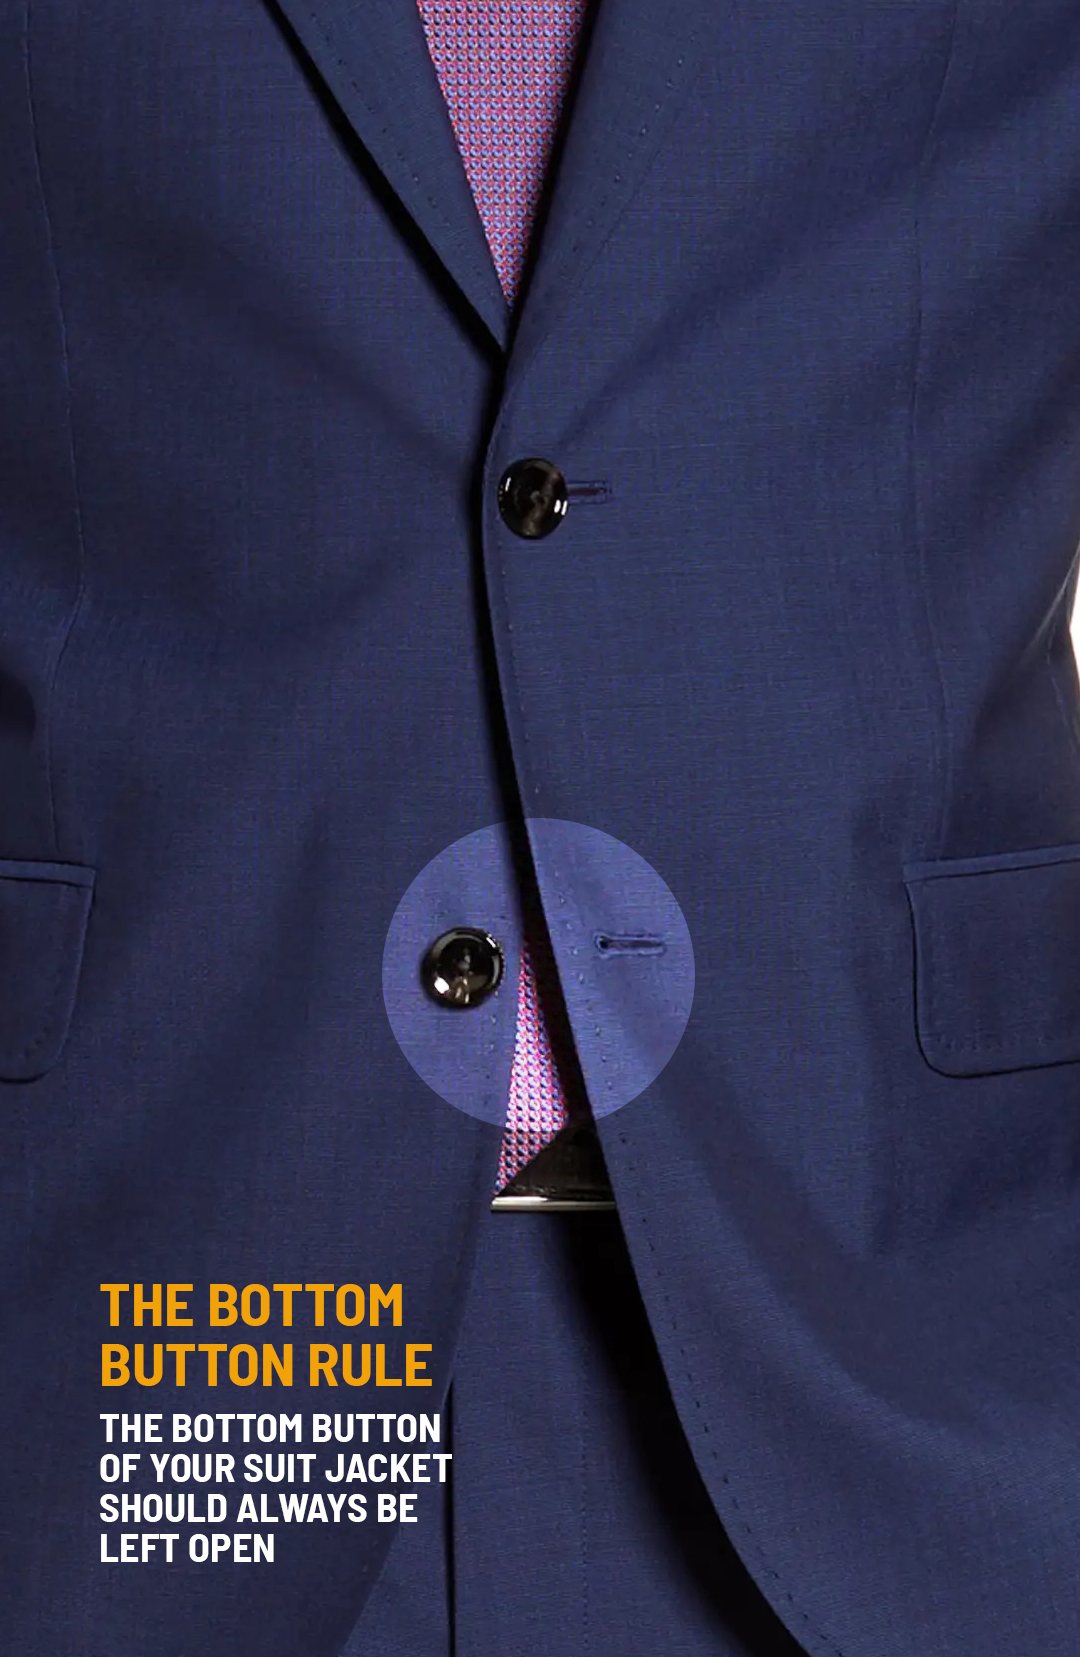 The bottom button rule: leave the bottom button of the suit jacket open